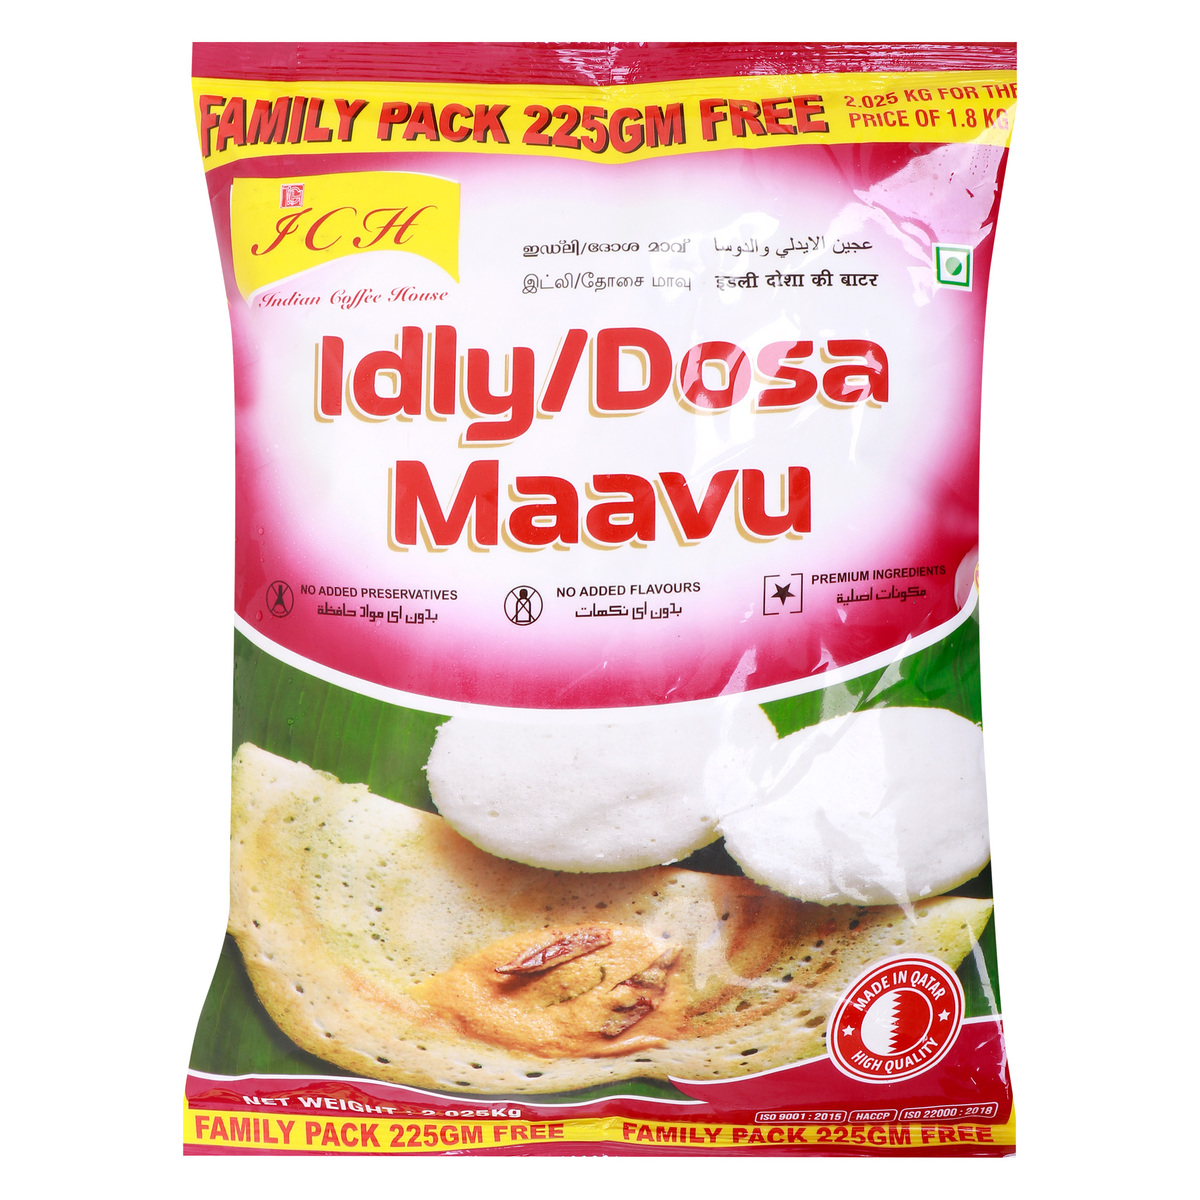 The Indian Coffee House Idly/Dosa Batter 2.025 kg